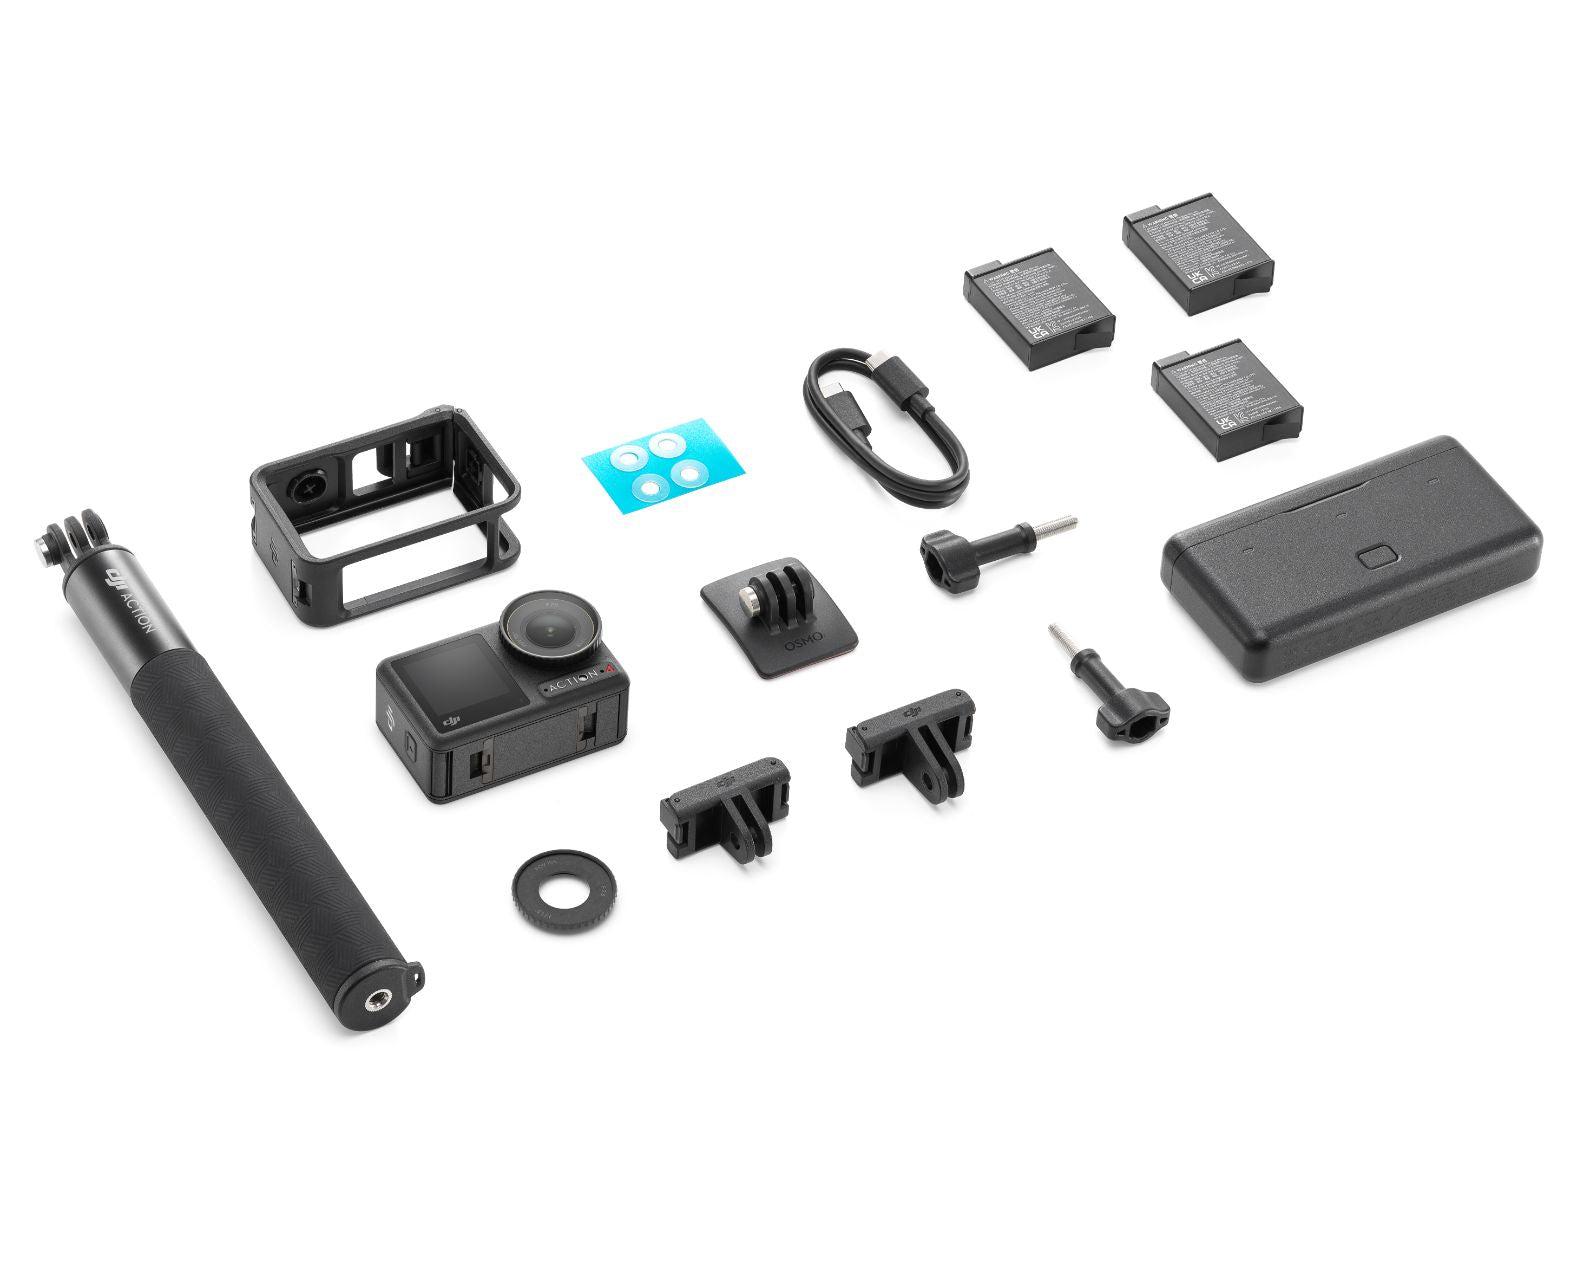 New DJI Osmo Action 4 camera shows up in FCC filings